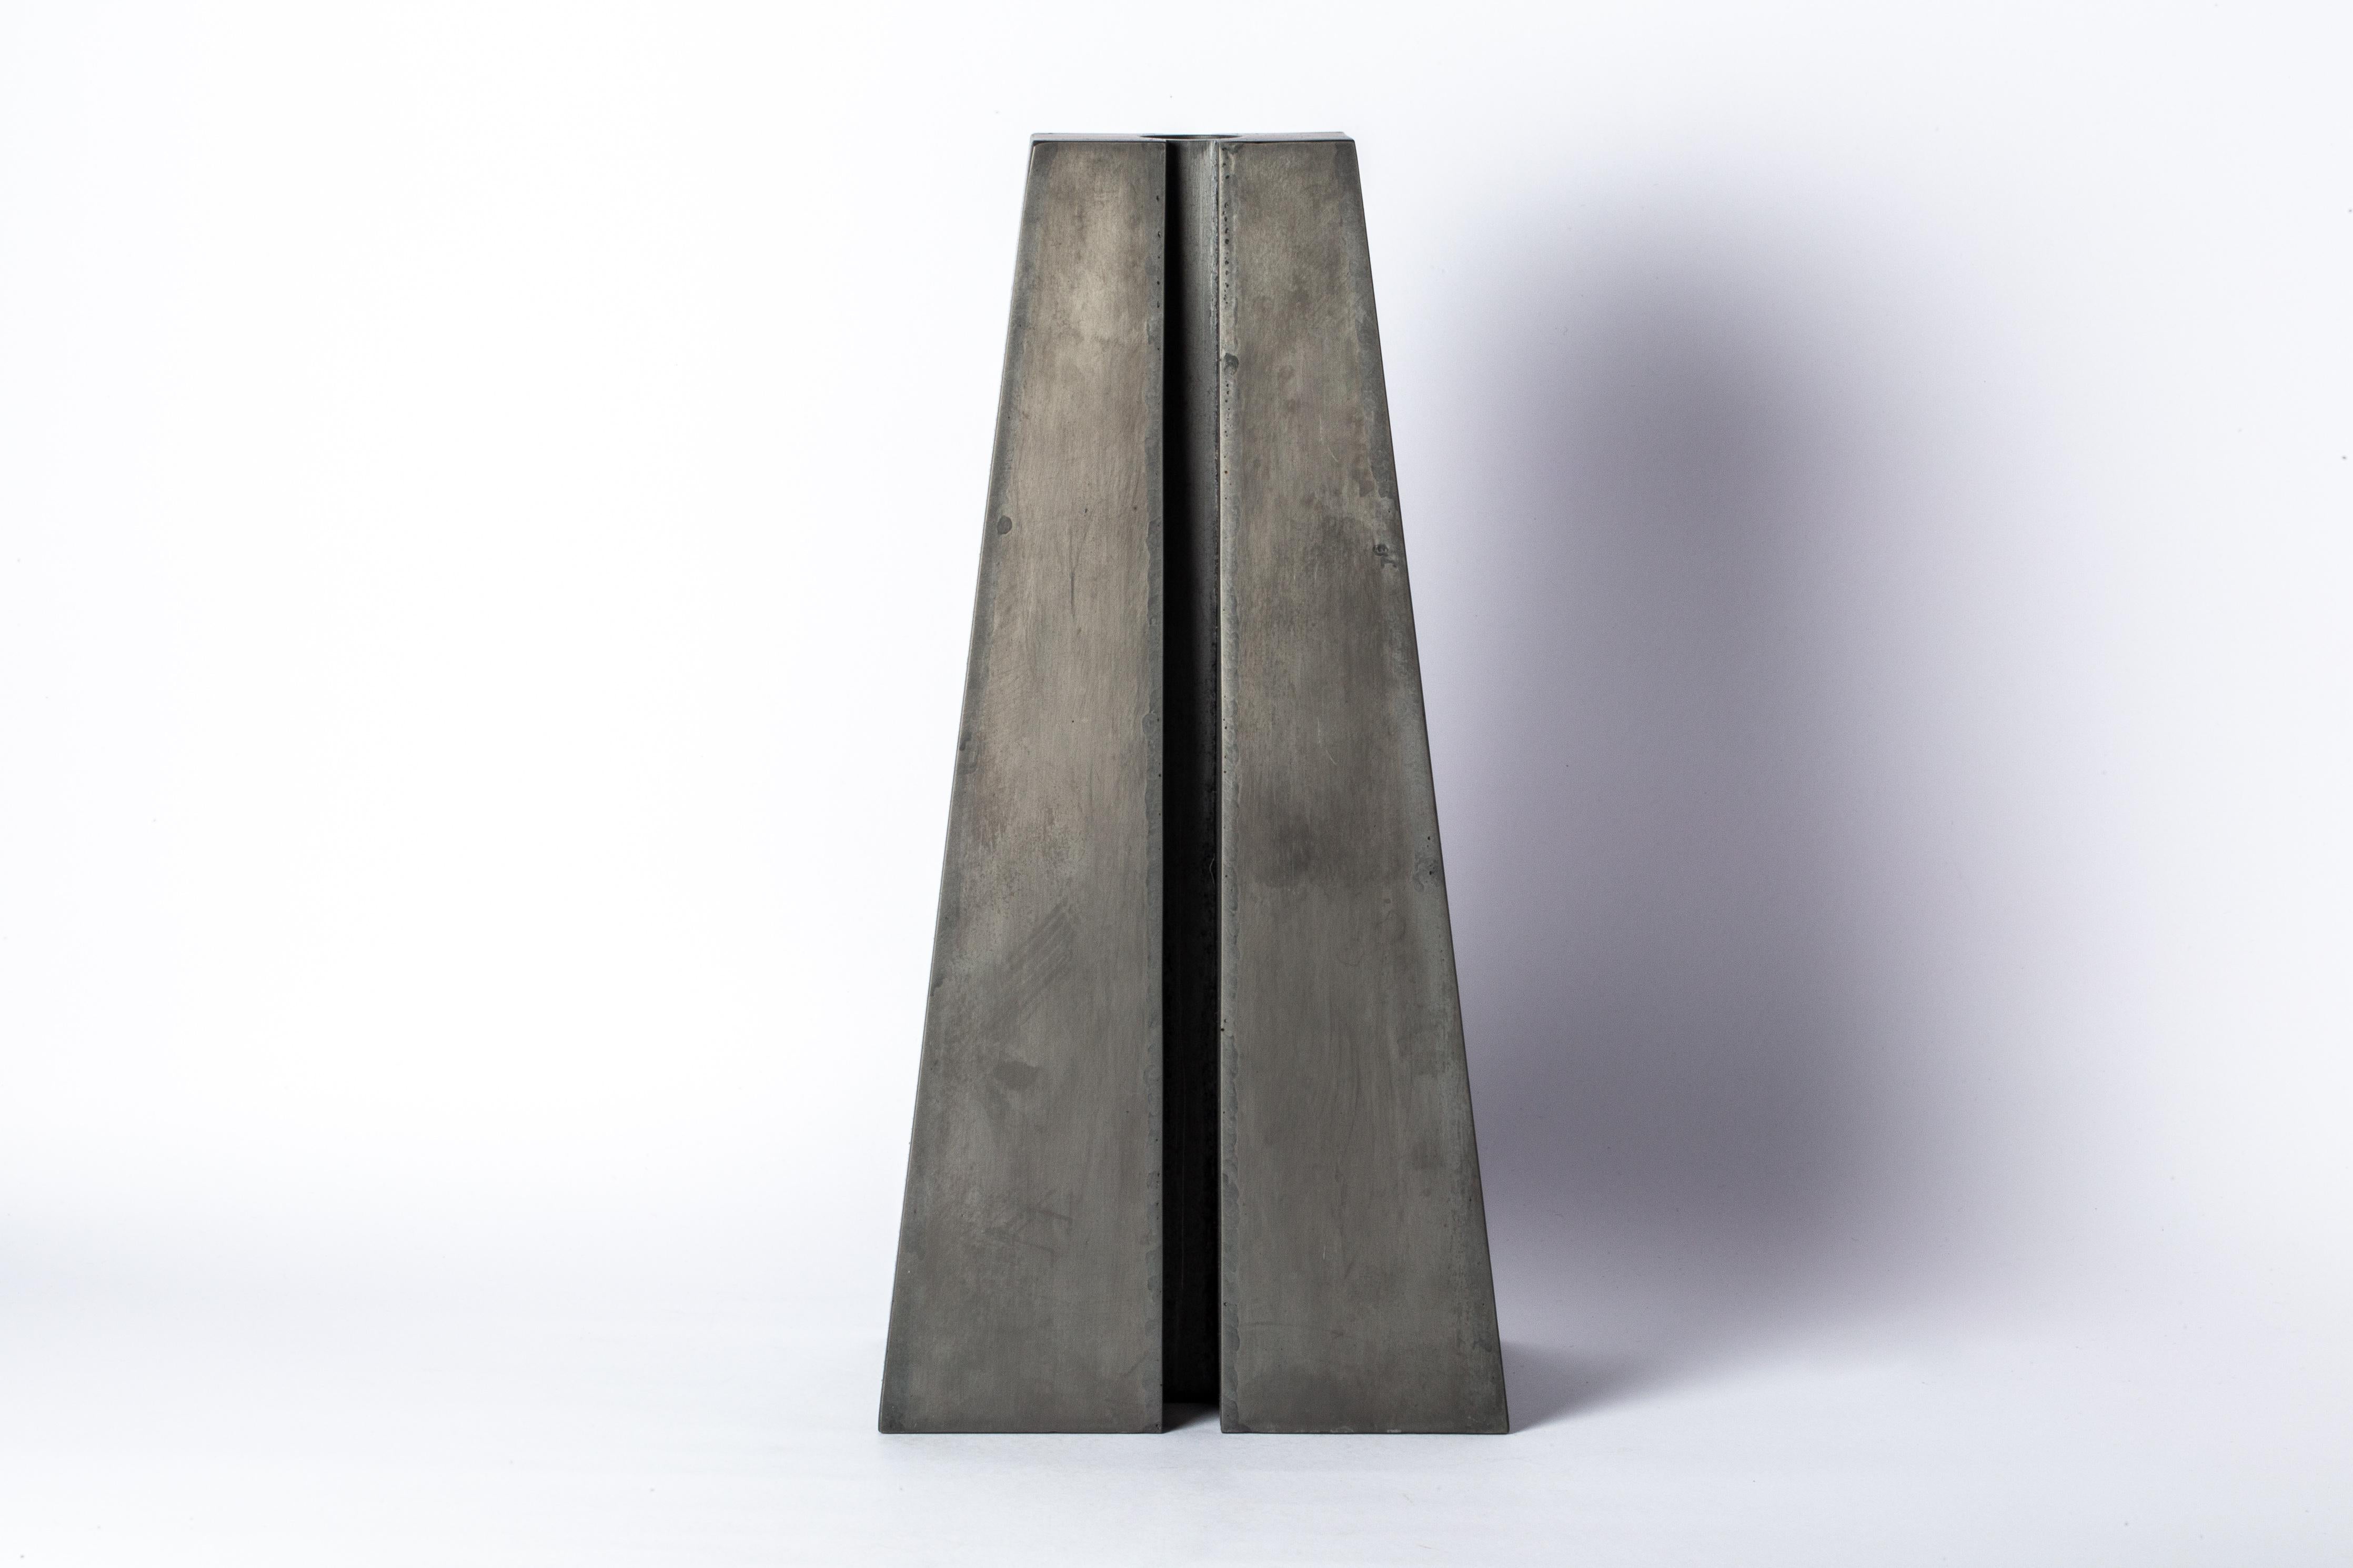 Candle Tower in iron. It showcases a stunning acid oxidation finish. It's more than just a candle holder; it's a captivating work of art that exudes charm and character.